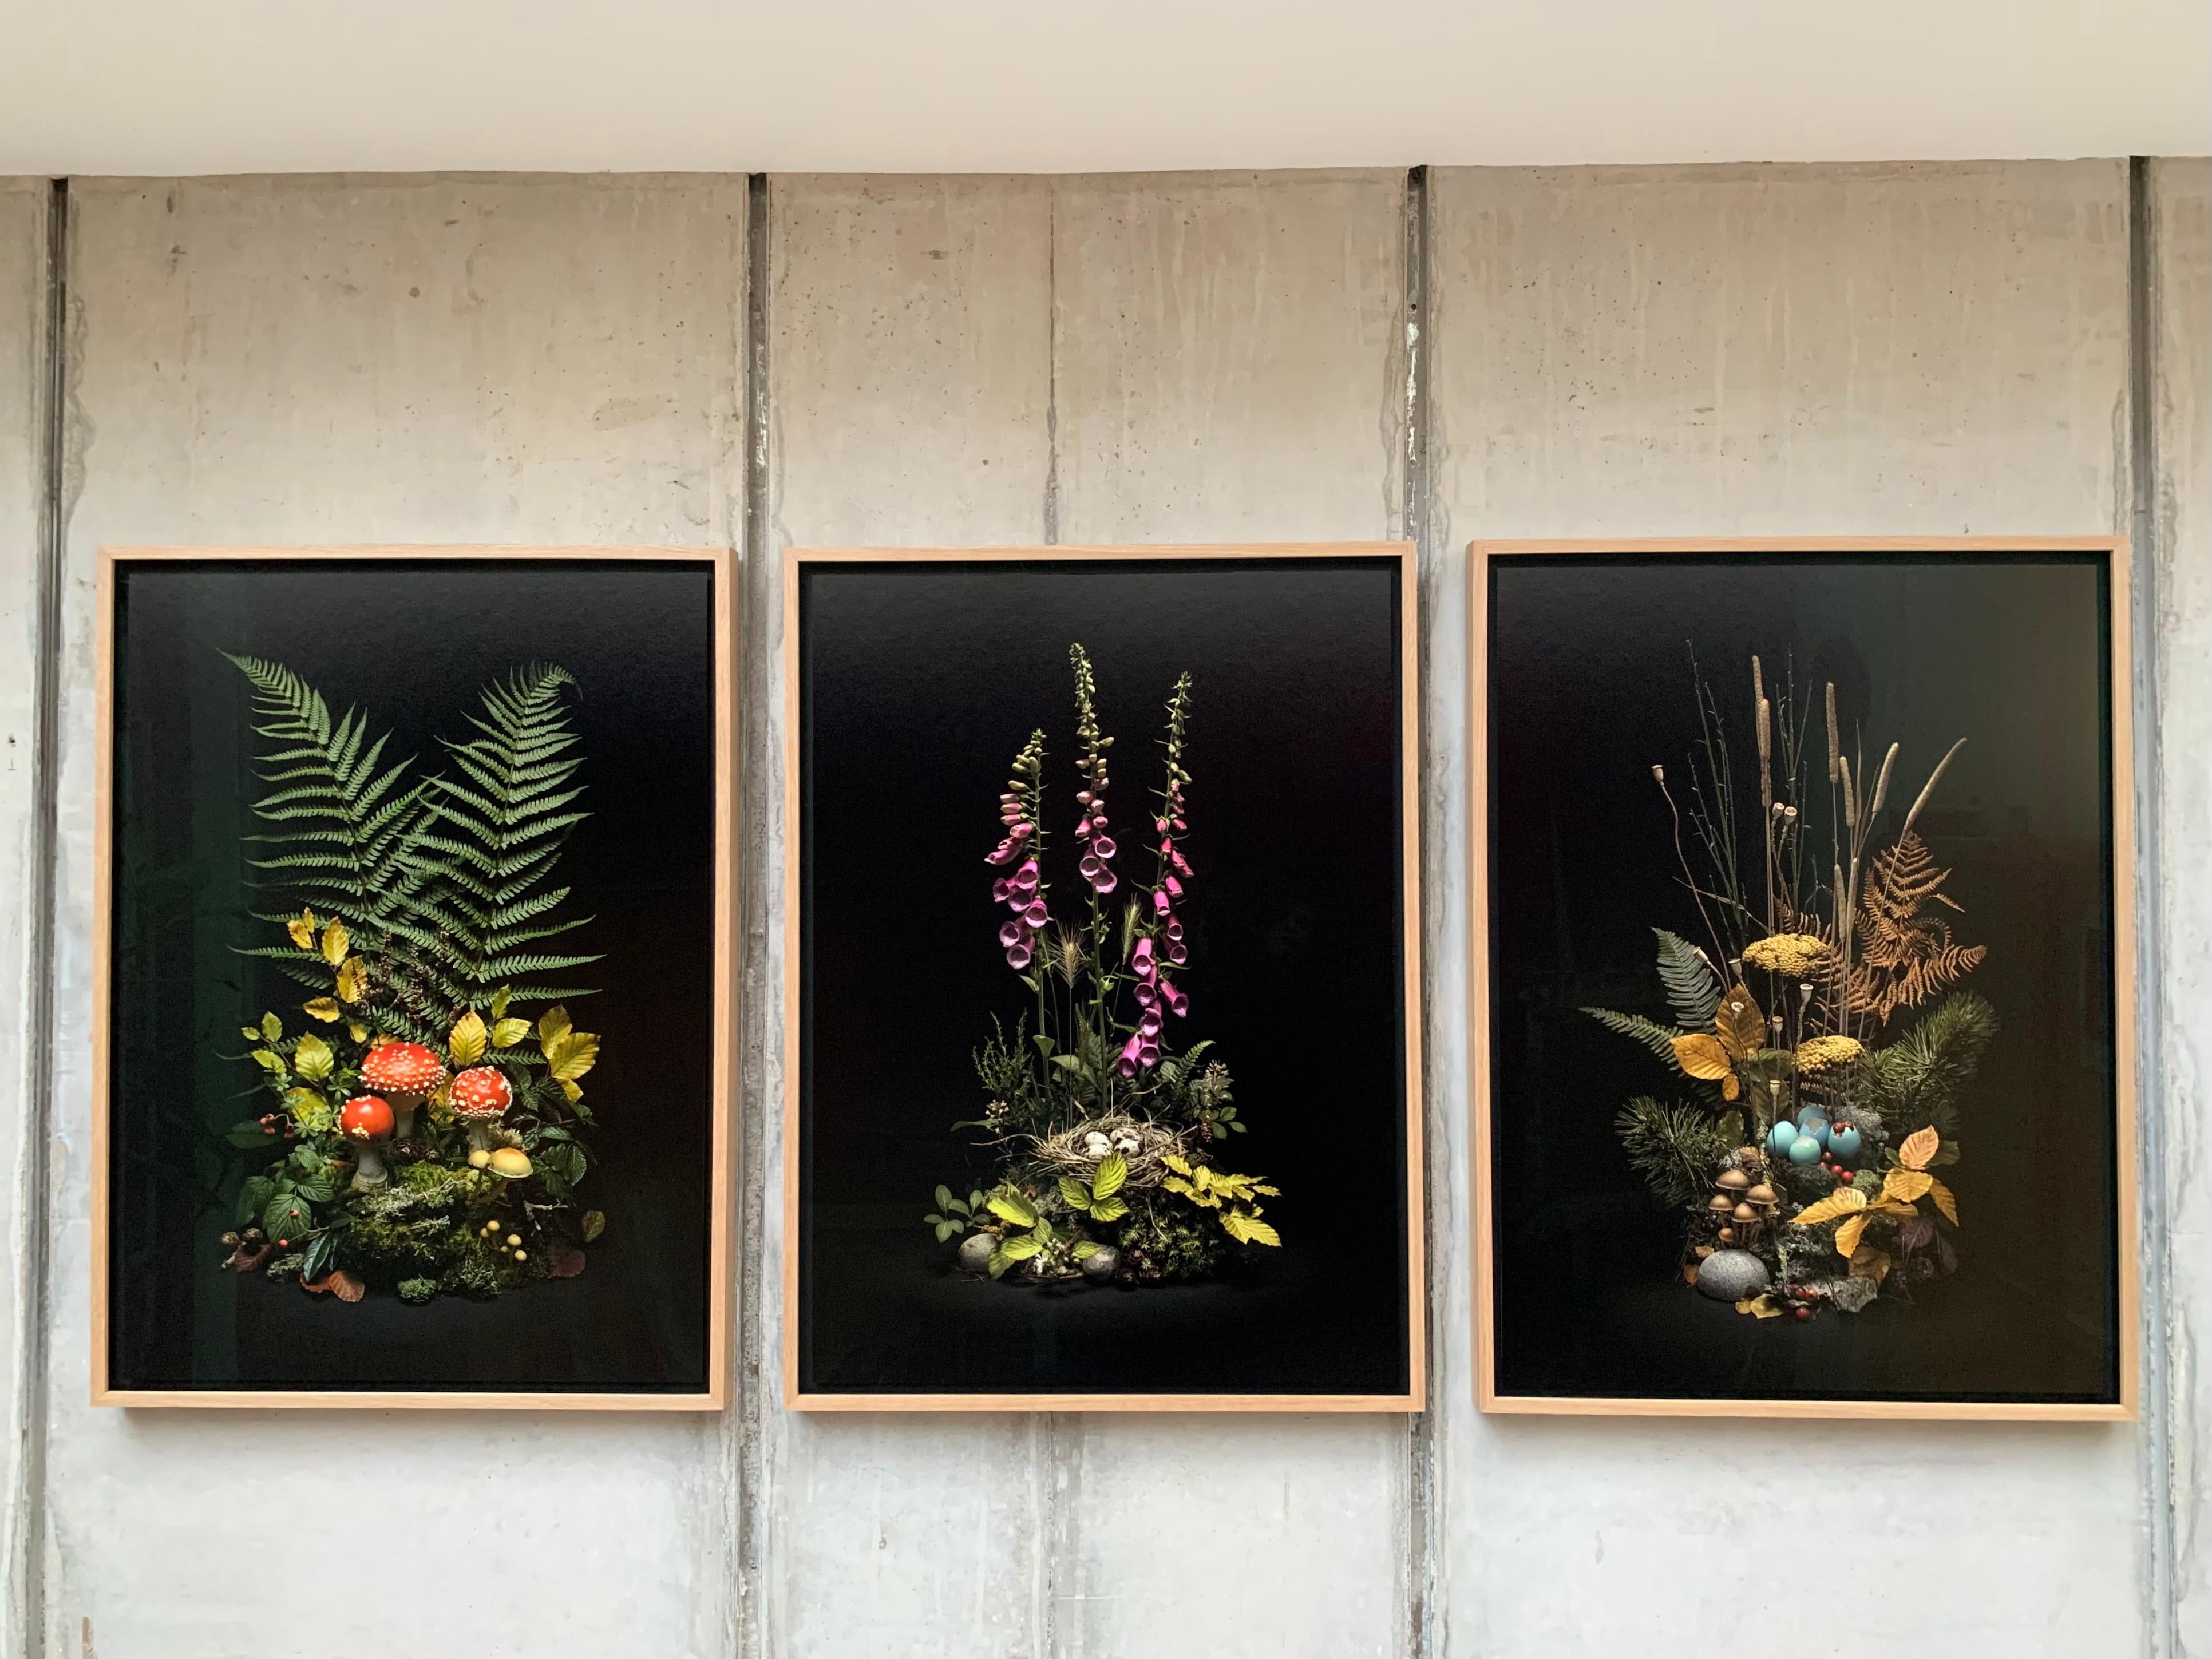 Inspired by Victorian era taxidermy dioramas, 'Dark Flora' is a series of photographs using wild plants and flowers in a curated yet naturalistic arrangement. The plants are foraged from forest clearings, hedgerows and roadside verges, often using